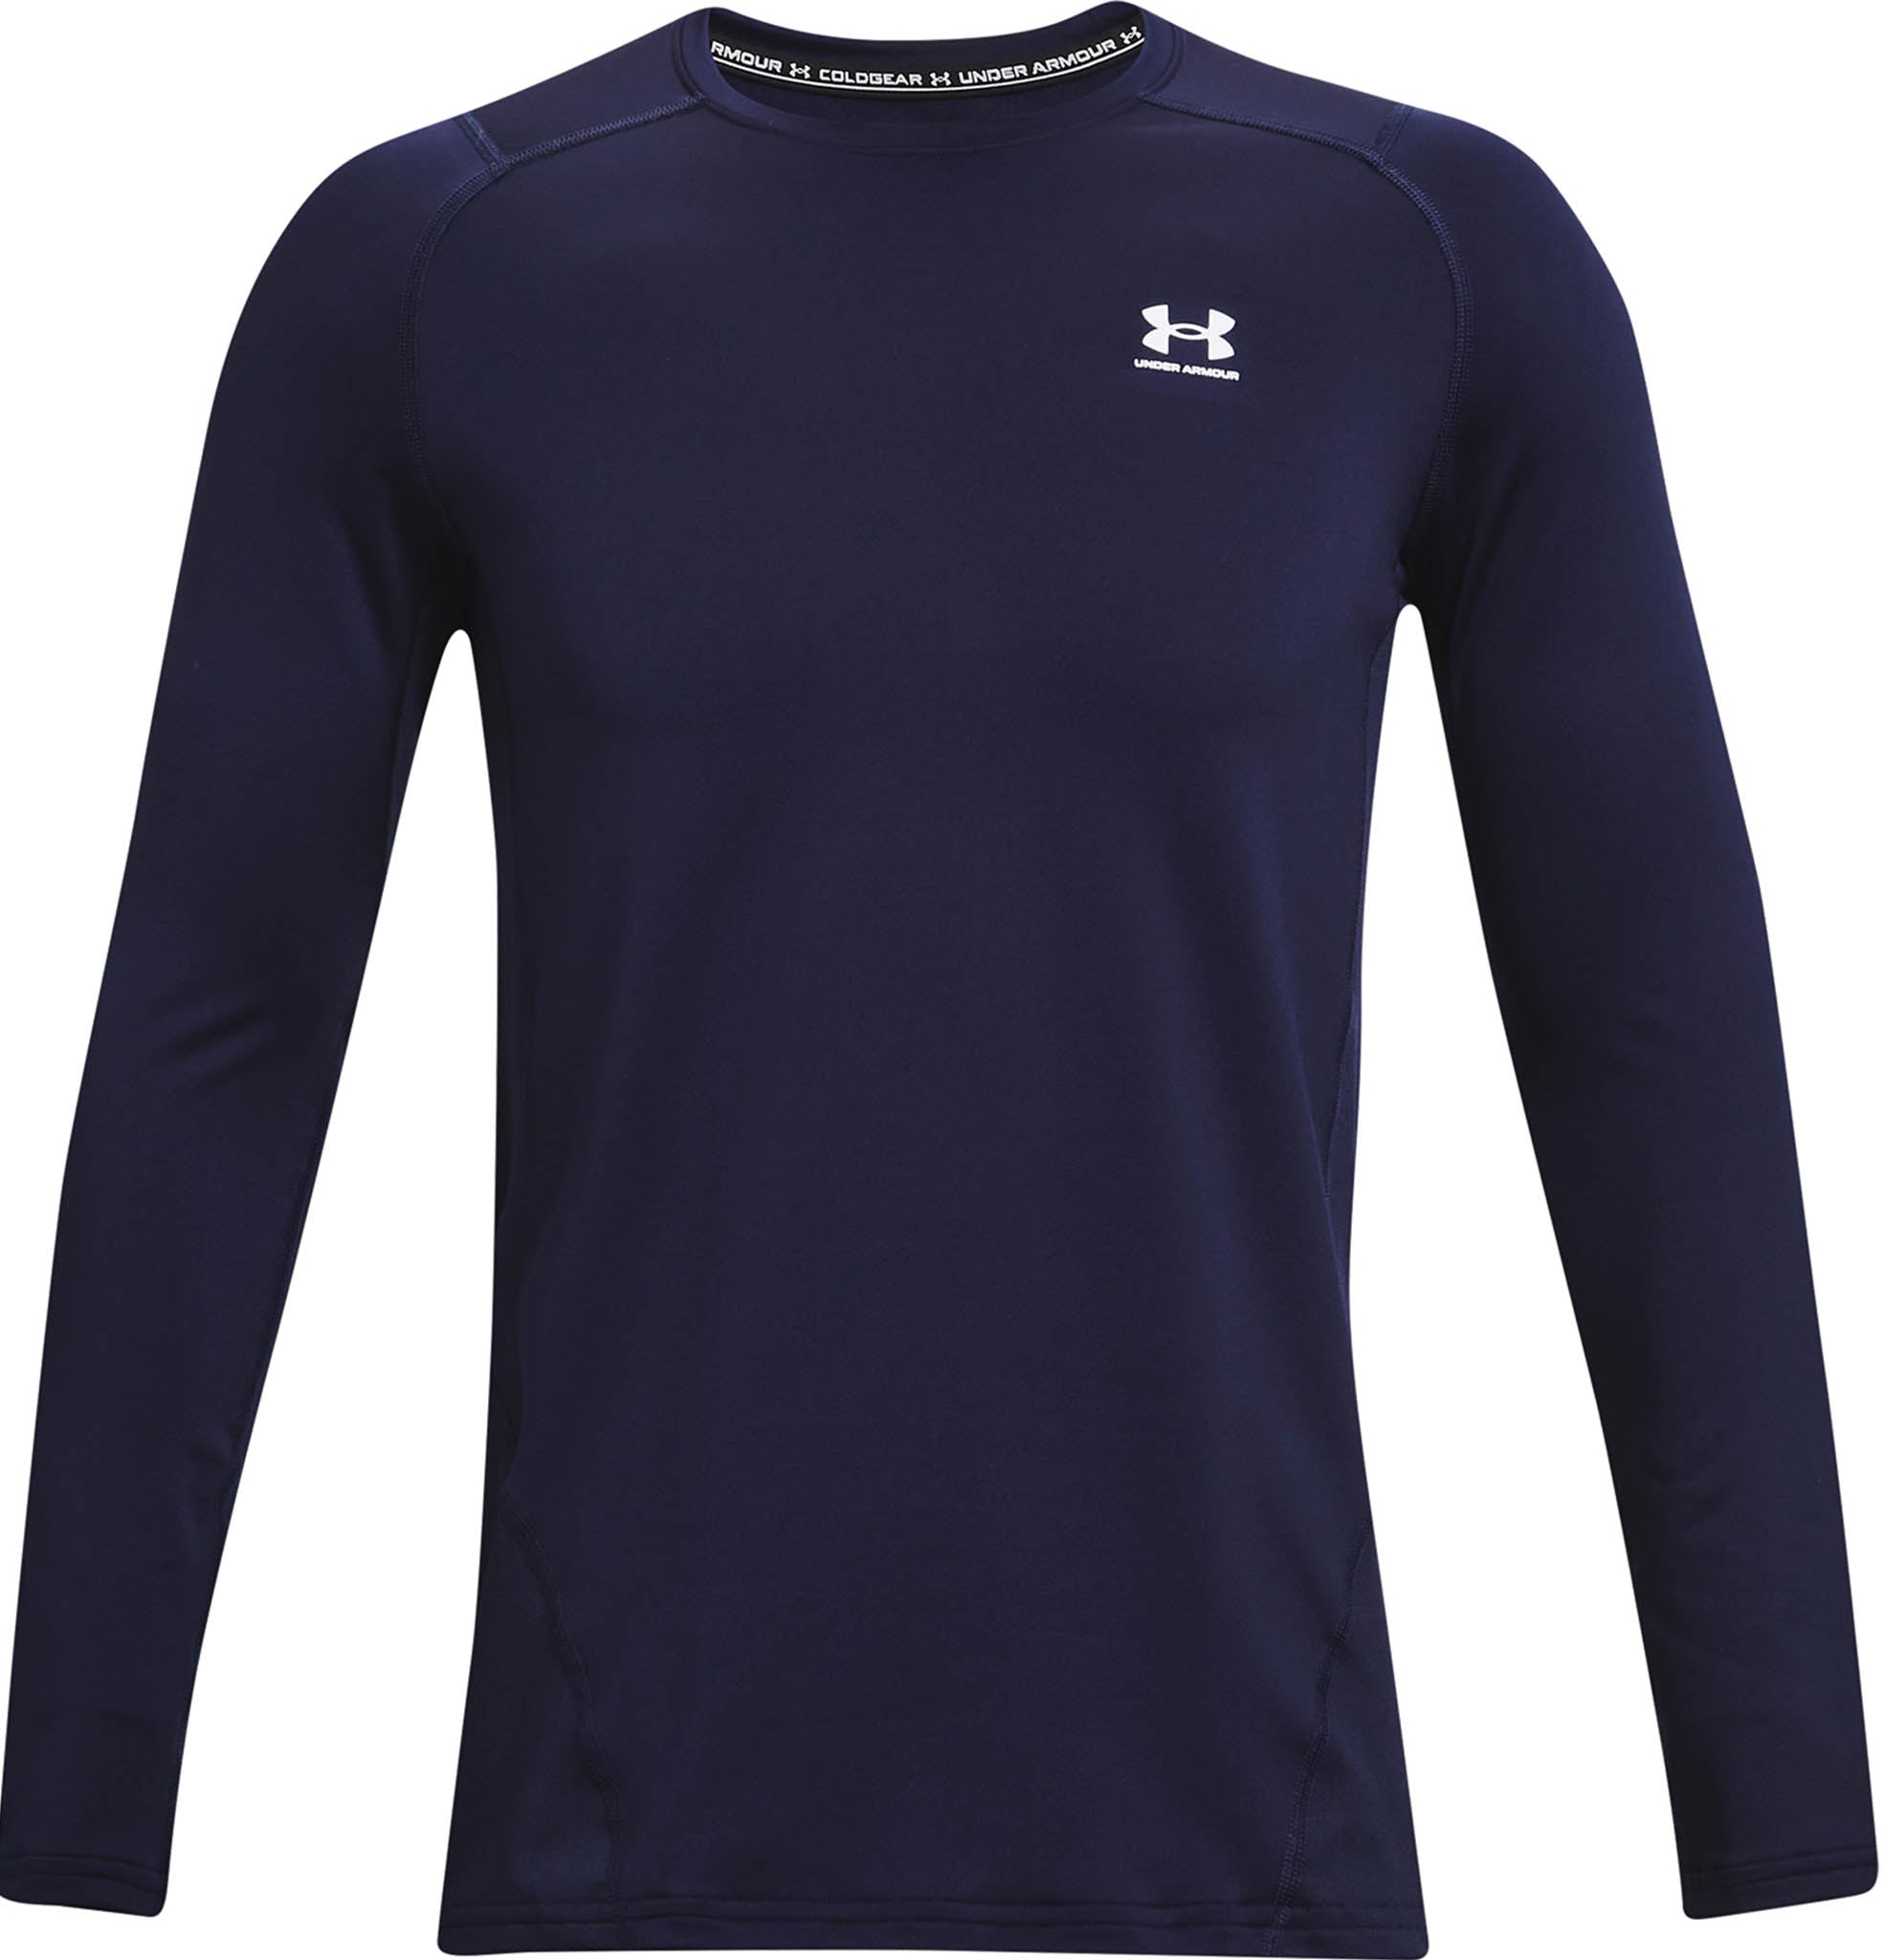 Under Armour Coldgear Armour Fitted Base Layer Crew Top Men's